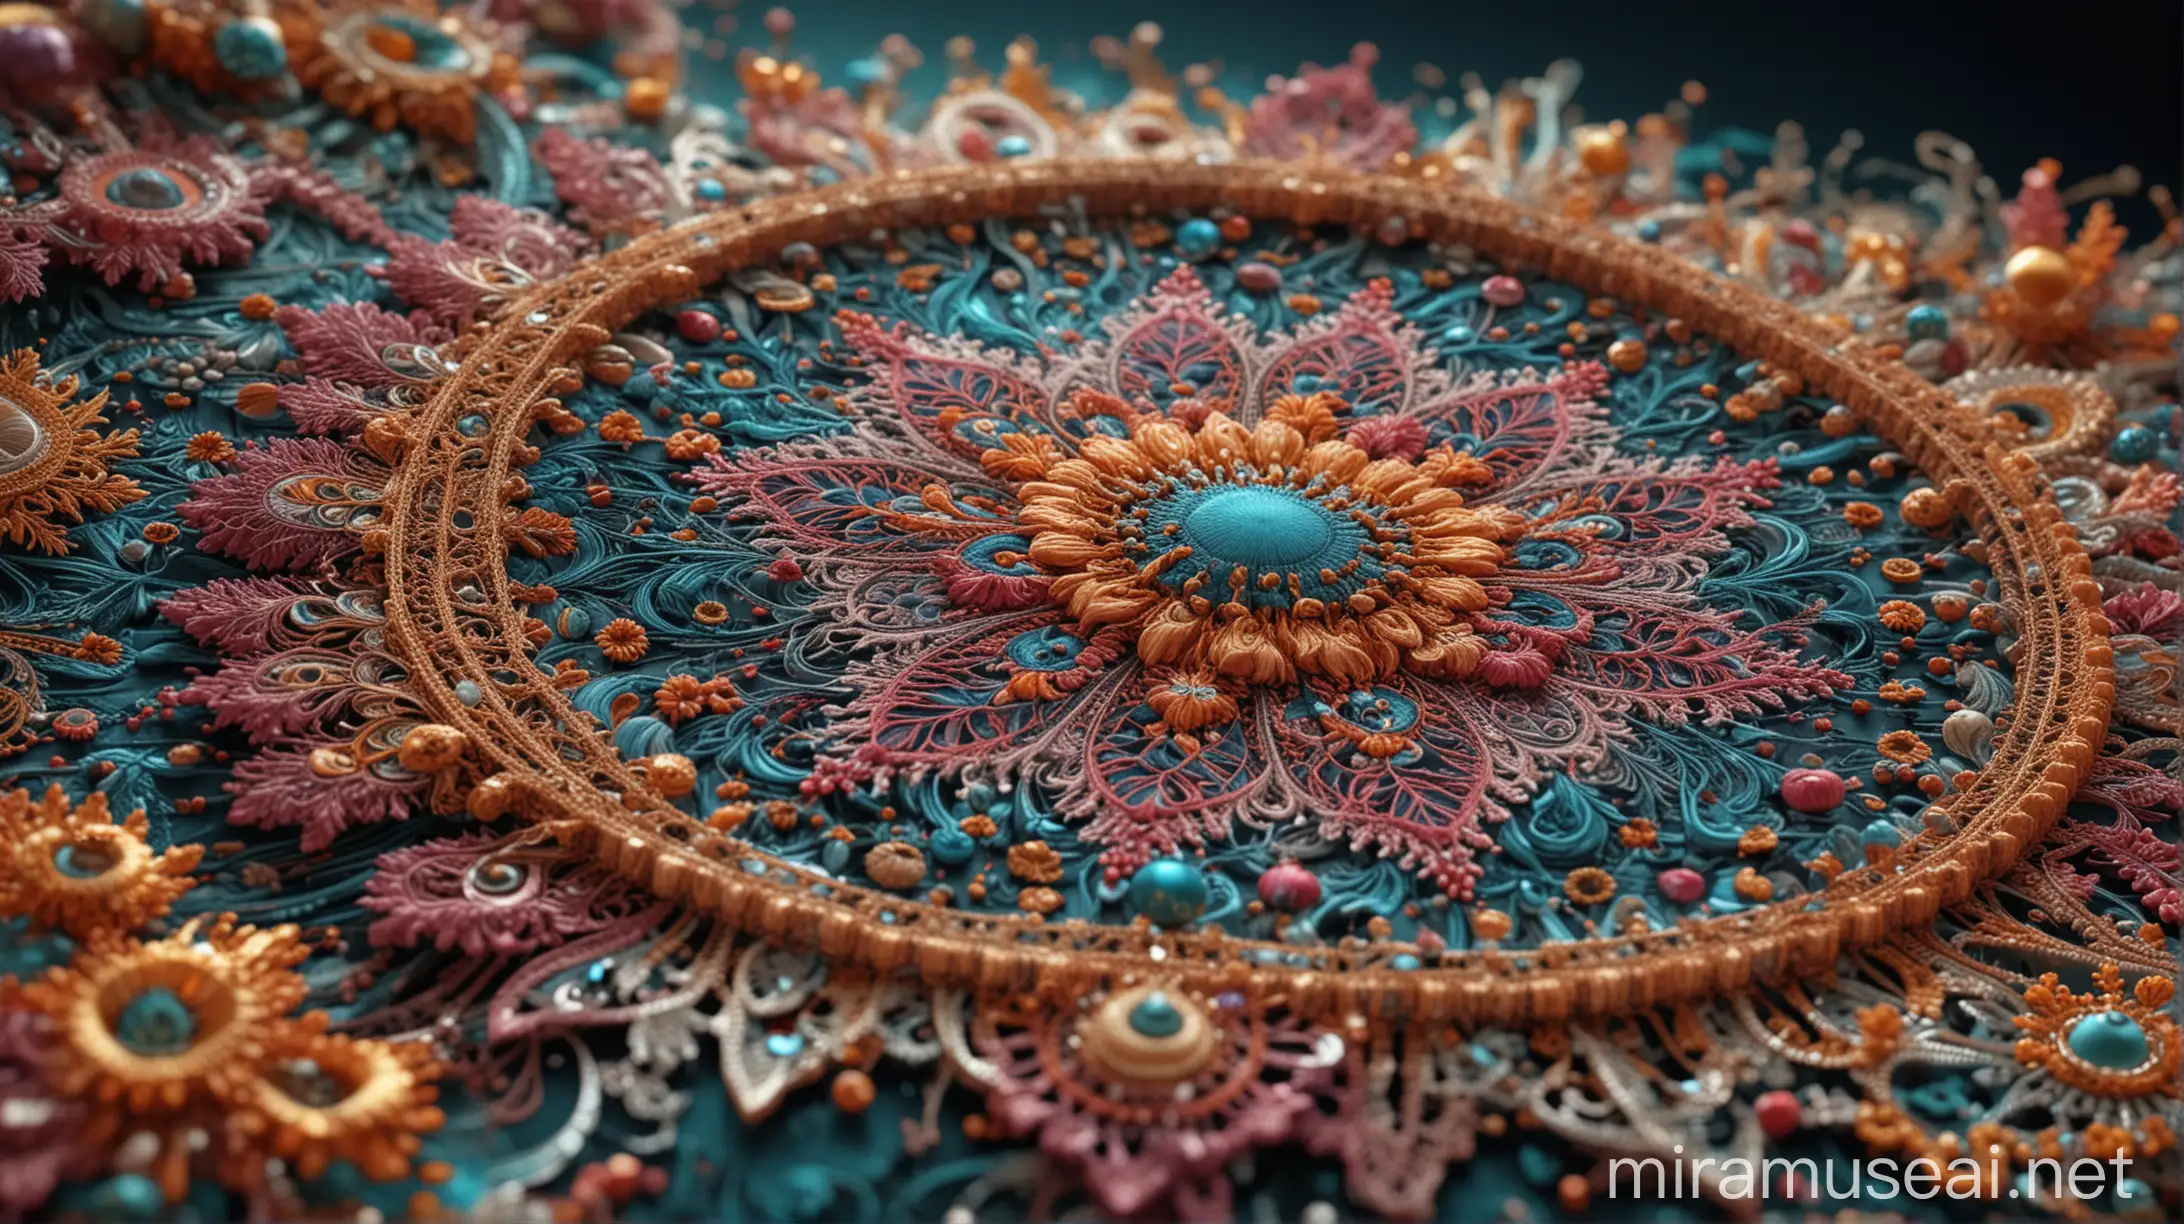 Make this picture more detailed, and more colourful in the centre, complex 3D rendering hyper detailed, fine lace filigree details, embroidered, mandelbrot fractal, octane design, 8k